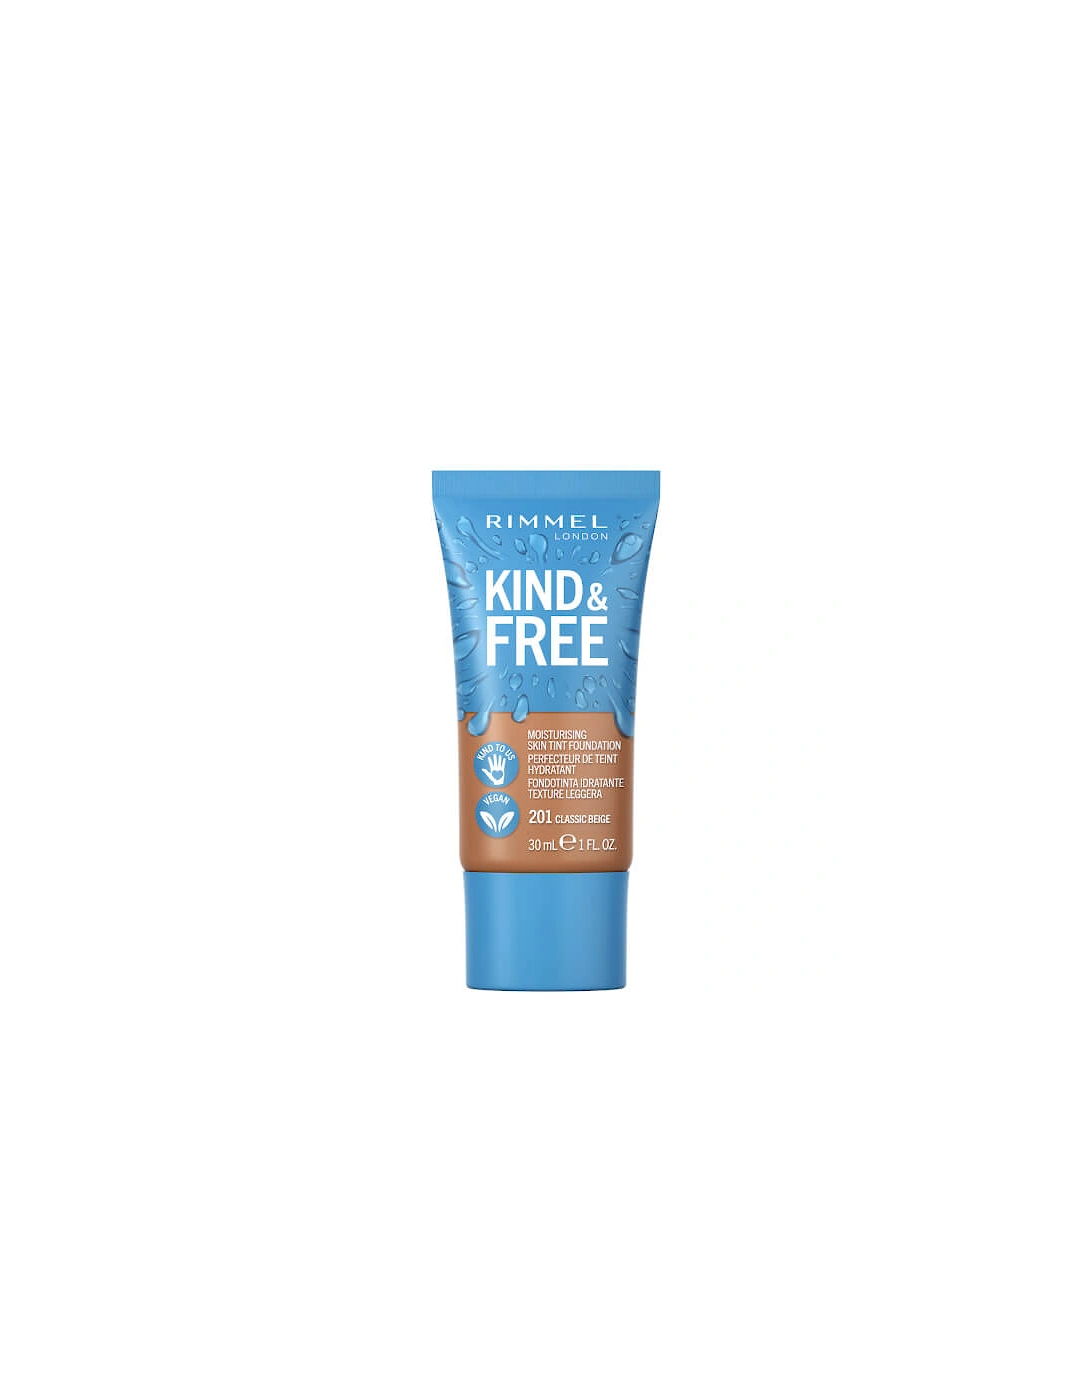 Kind and Free Skin Tint Moisturising Foundation - Classic Beige, 2 of 1